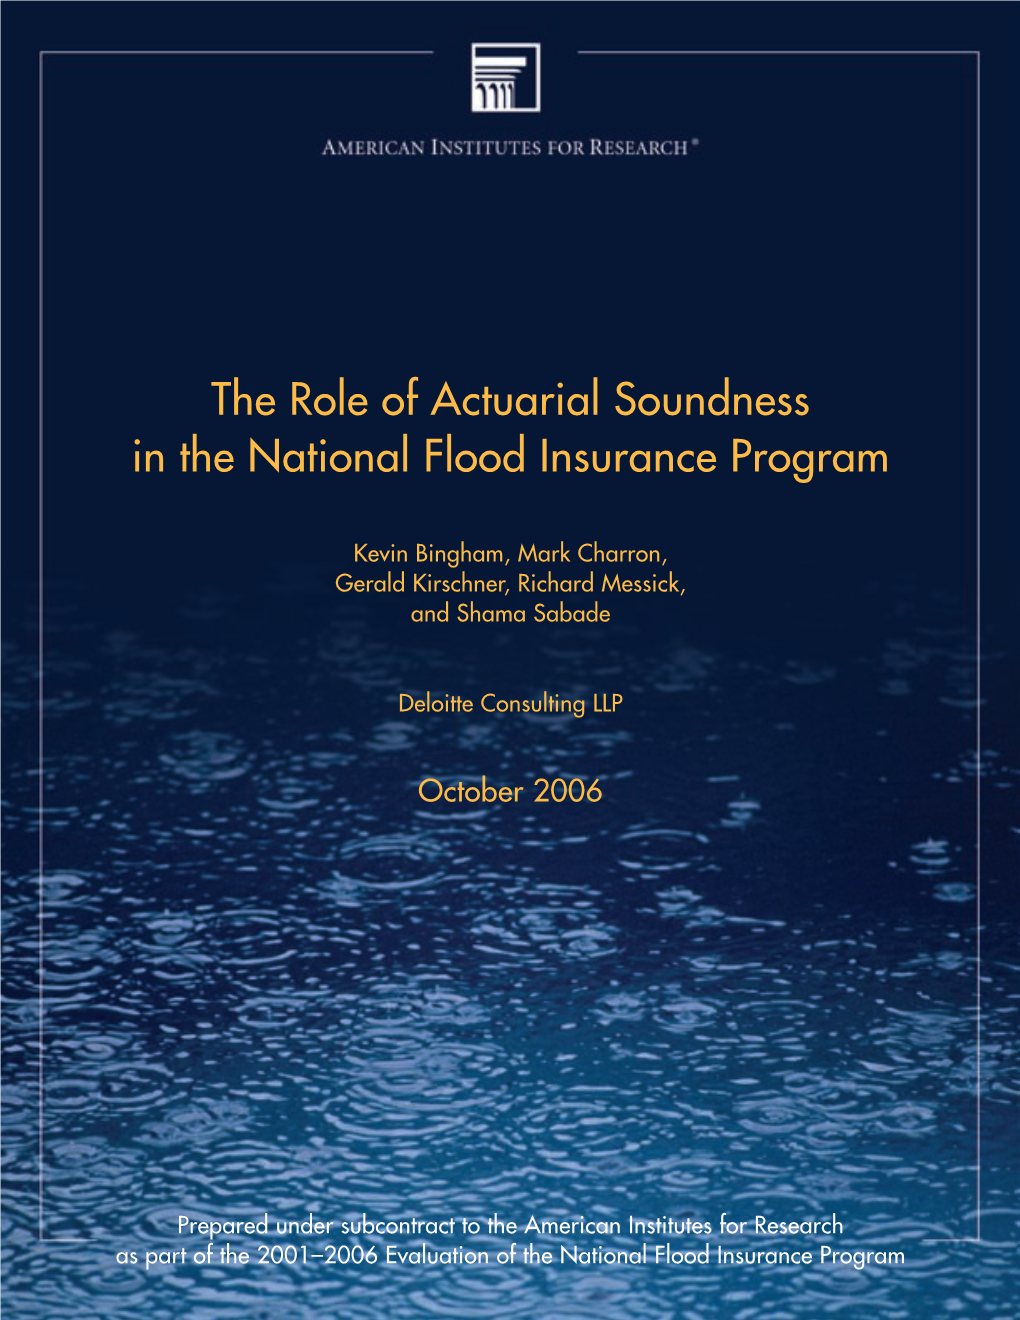 The Role of Actuarial Soundness in the National Flood Insurance Program